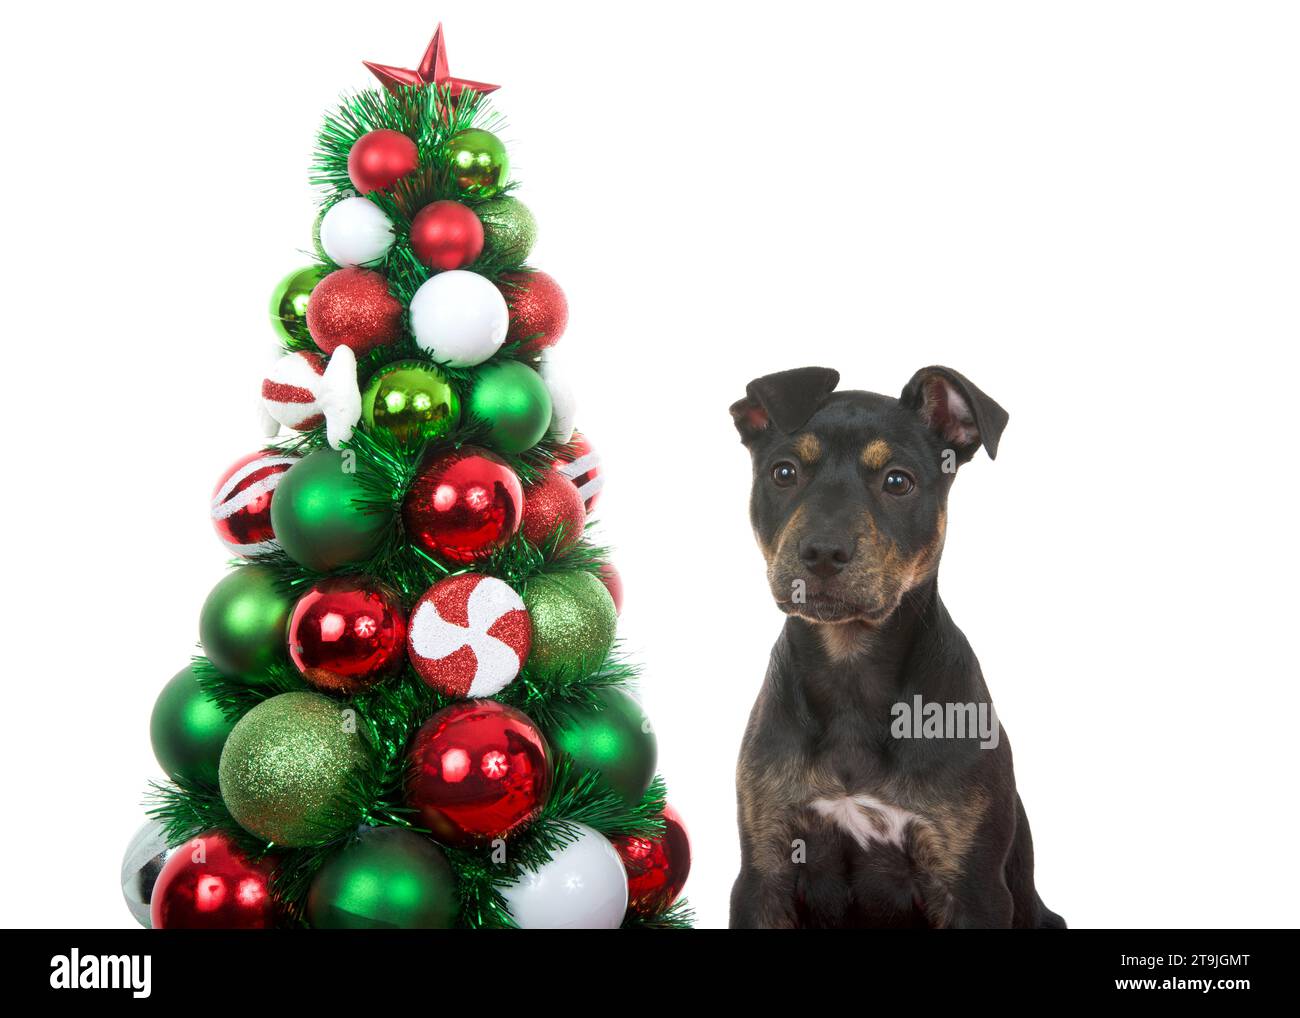 Black and brown brindle American Staffordshire Terrier puppy dog next to a Christmas tree covered in colorful ball ornaments, puppy towards viewer. Is Stock Photo